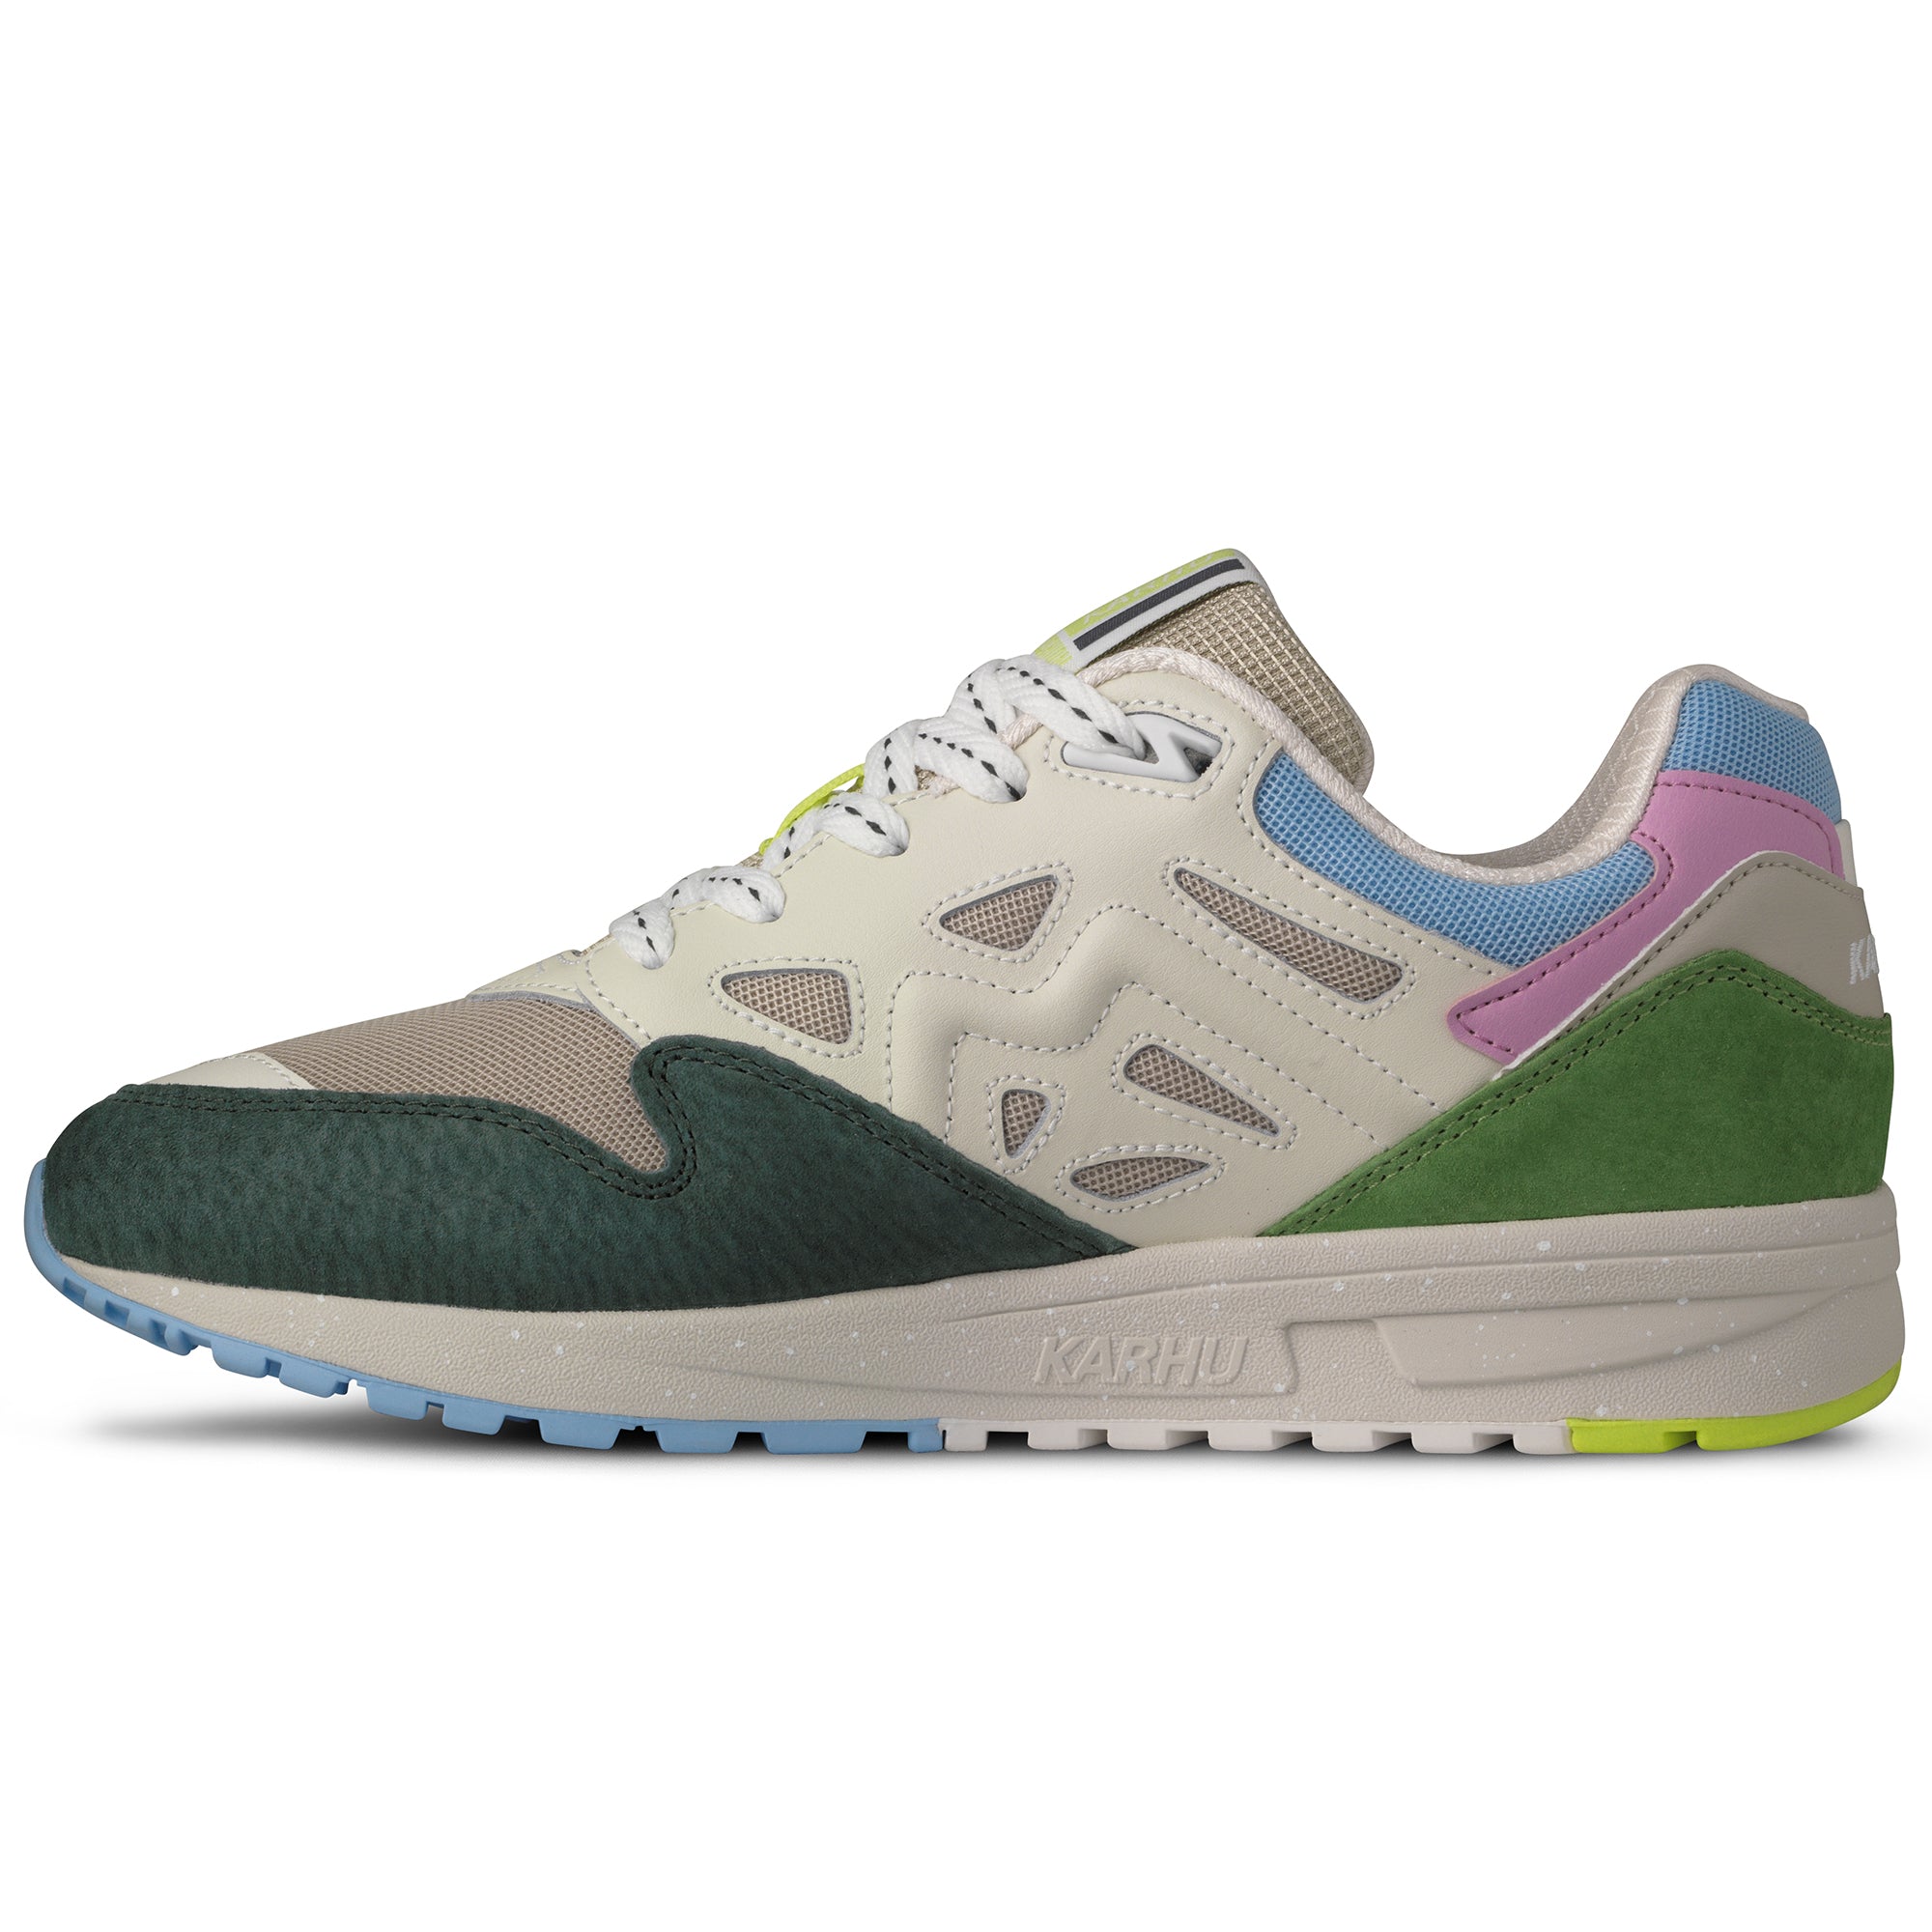 Karhu Legacy 96 Trainers - Piquant Green/Silver Lining